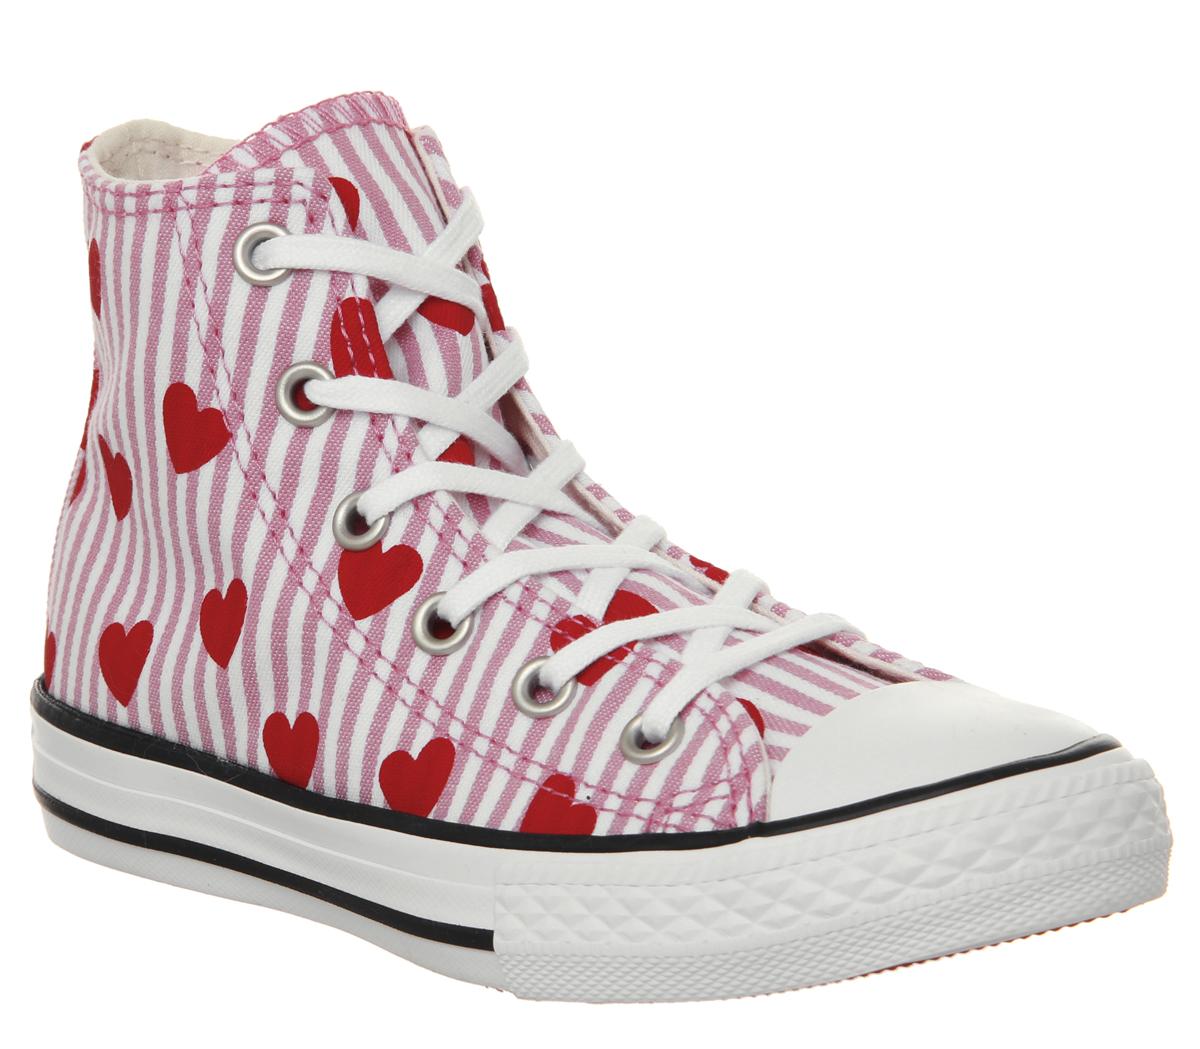 Converse All Star Hi Mid Trainers Pink Stripe Red Heart - Unisex